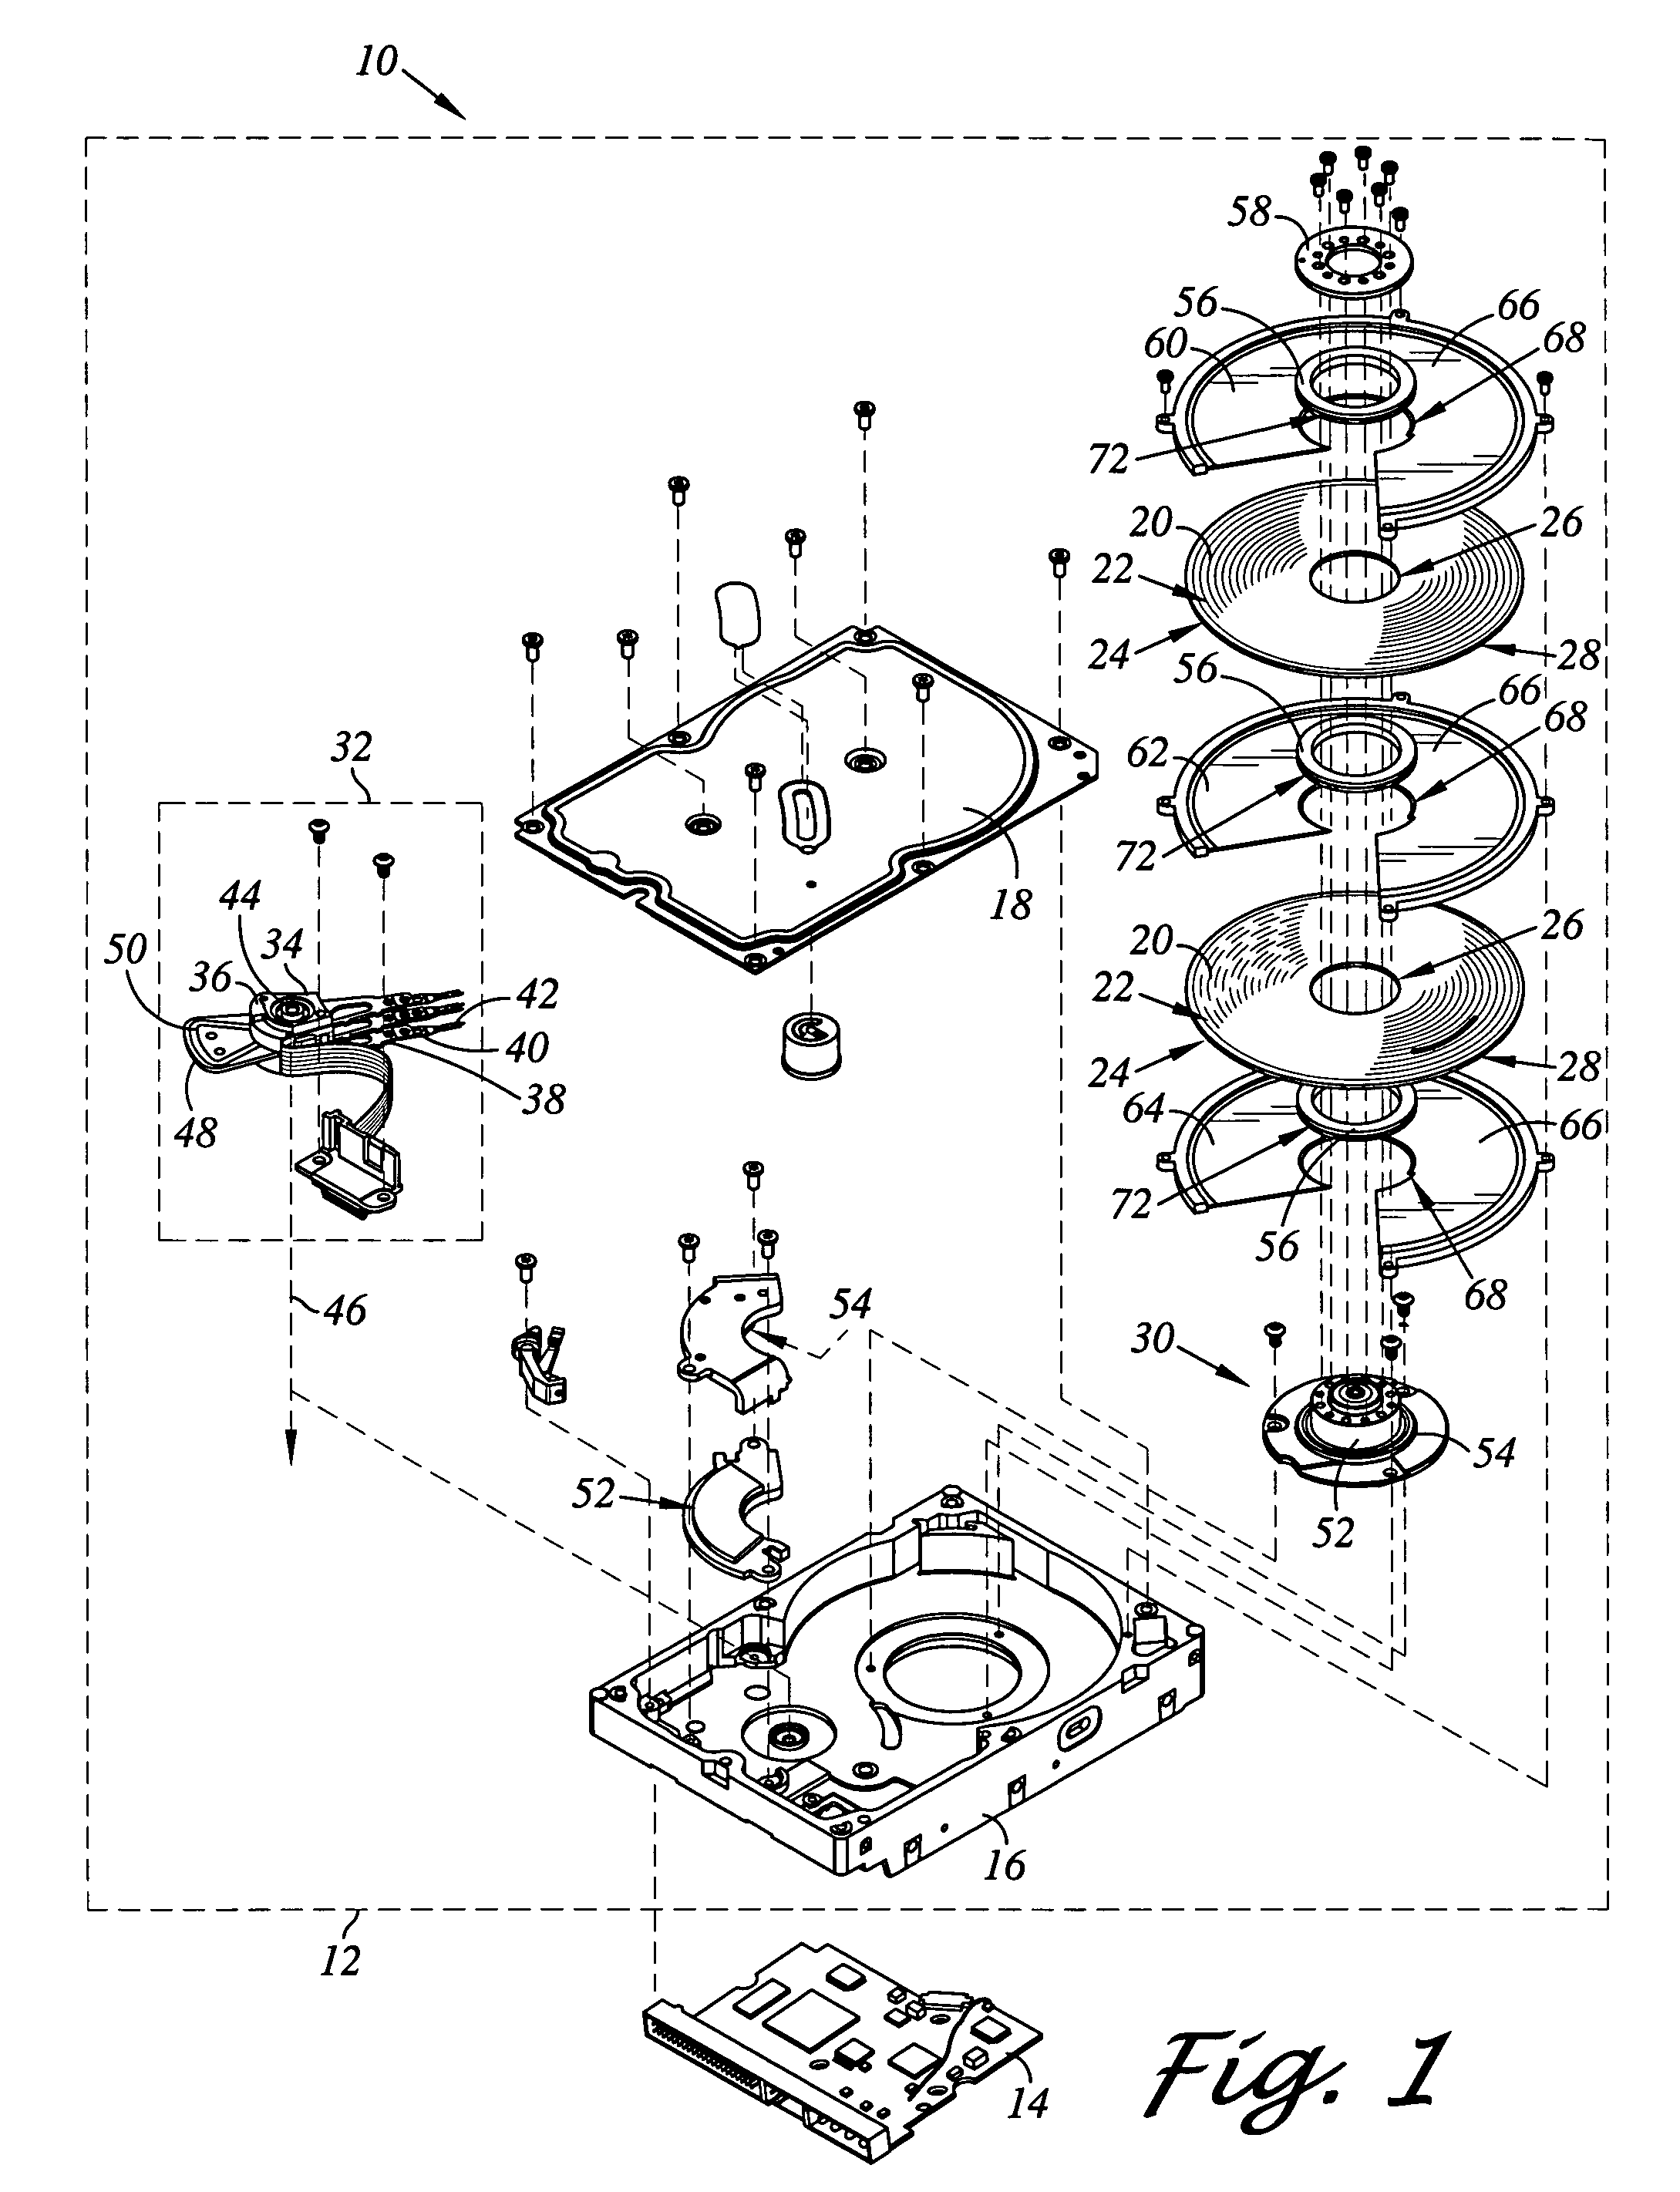 Disk drive including a disk plate overlapping a disk spacer in a circumferential disk spacer opening